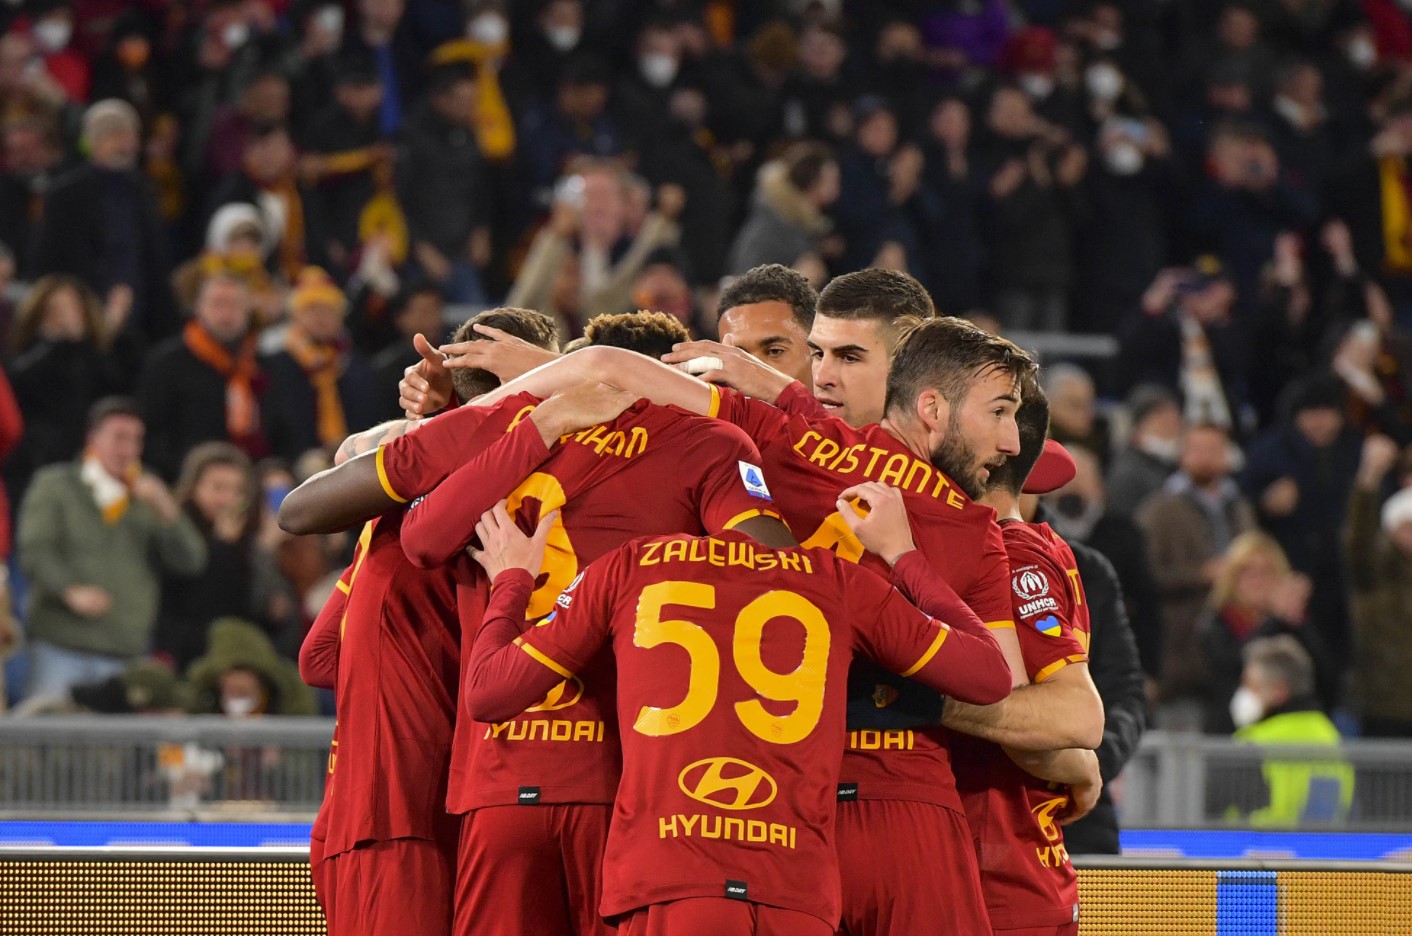 Strong the matches. As ROMA Conference League winner.